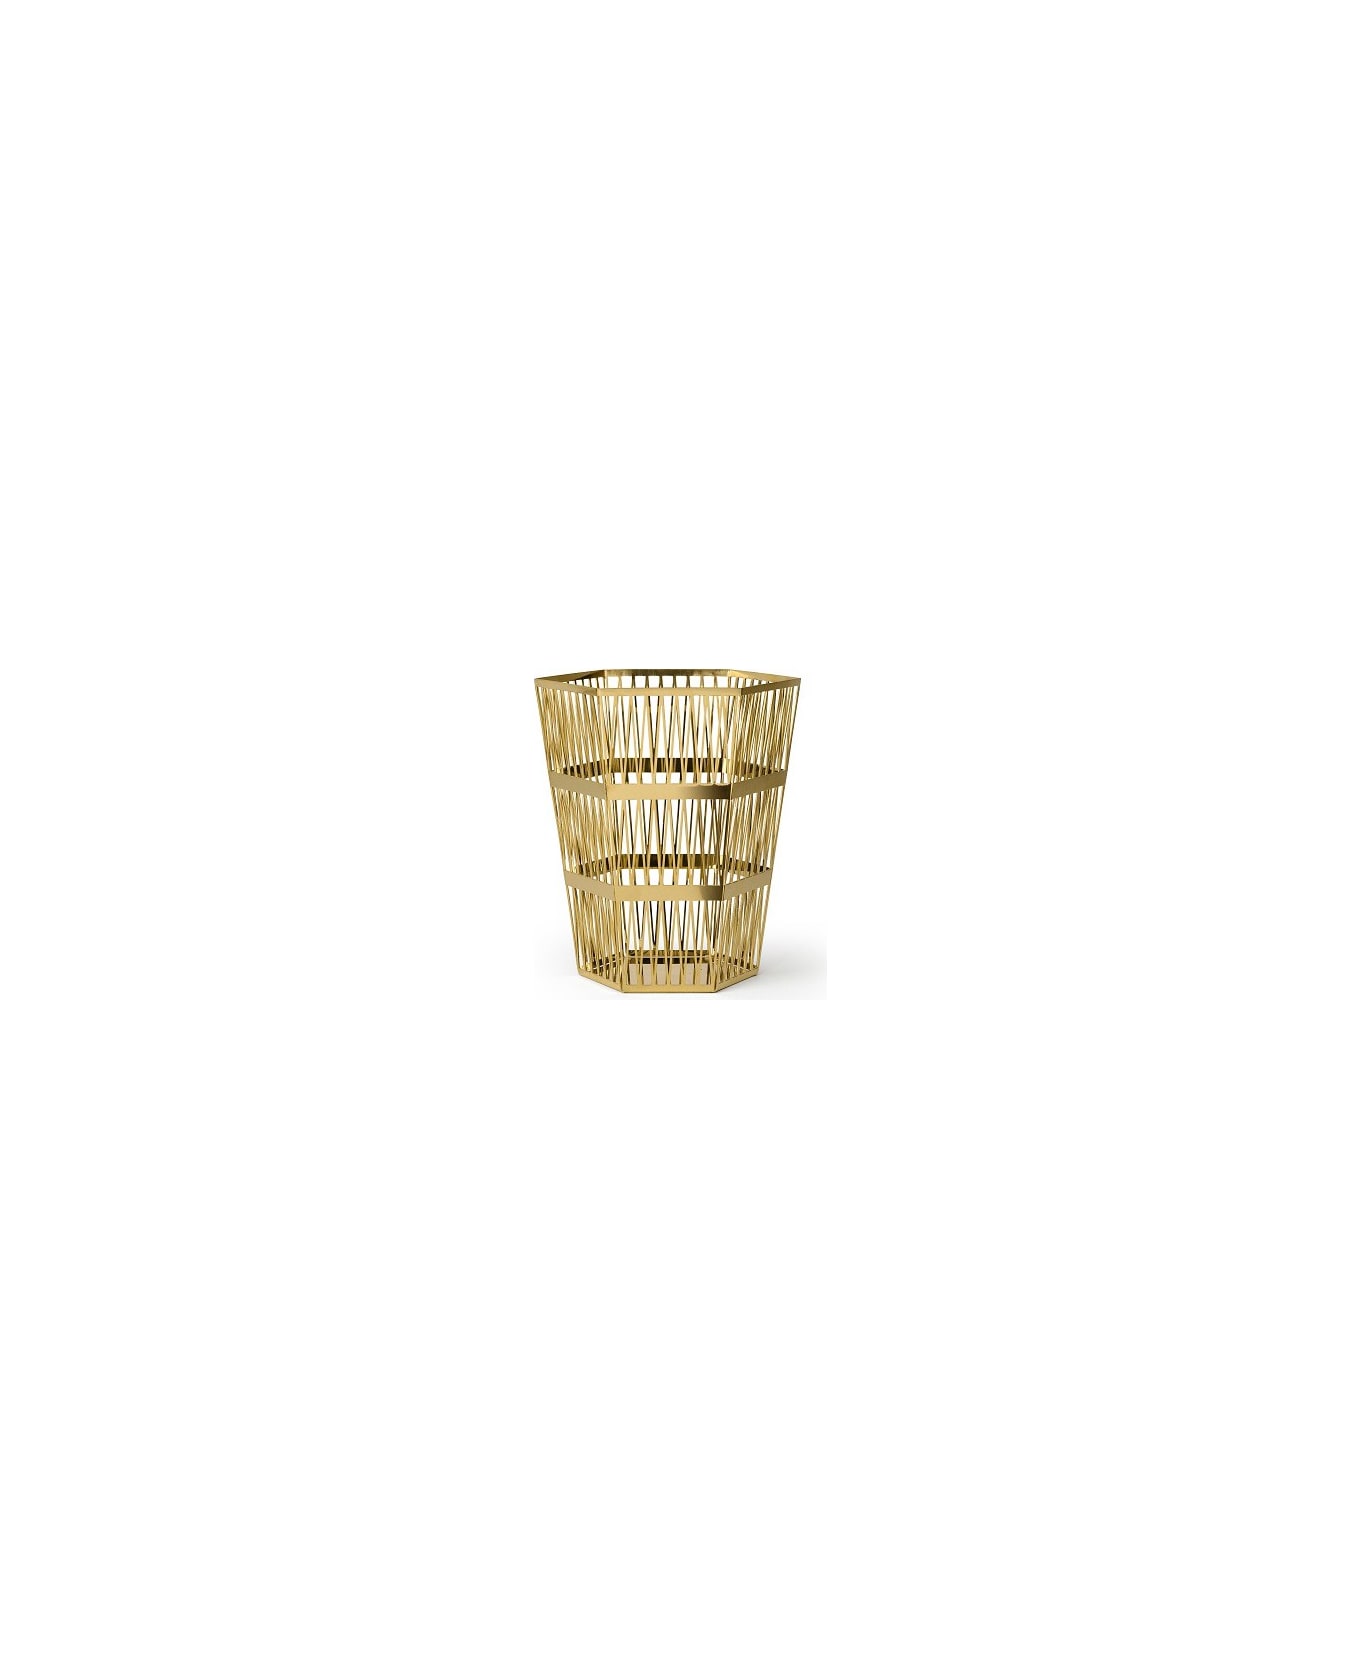 Ghidini 1961 Tip Top - Small Paper Basket Polished Gold - Polished gold インテリア雑貨